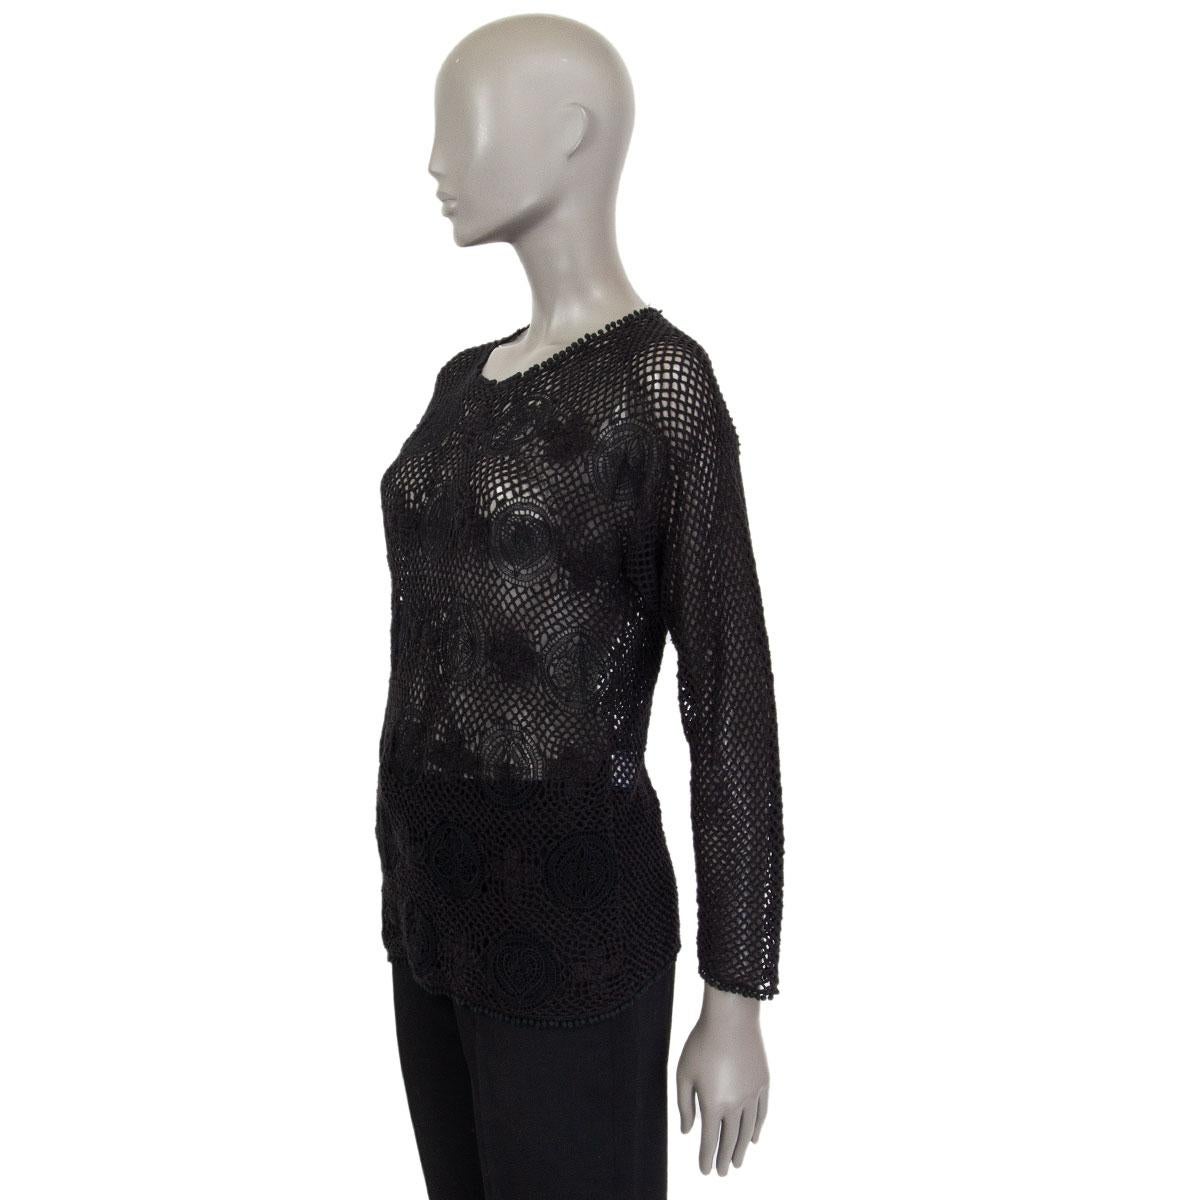 authentic Chloé long-sleeve crochet top in black cotton (78%) and polyamide (22%) and lace inserts in cotton (100%). Has been worn and is in excellent condition. 

Tag Size XS
Size XS
Shoulder Width 46cm (17.9in)
Bust 96cm (37.4in)
Waist 84cm